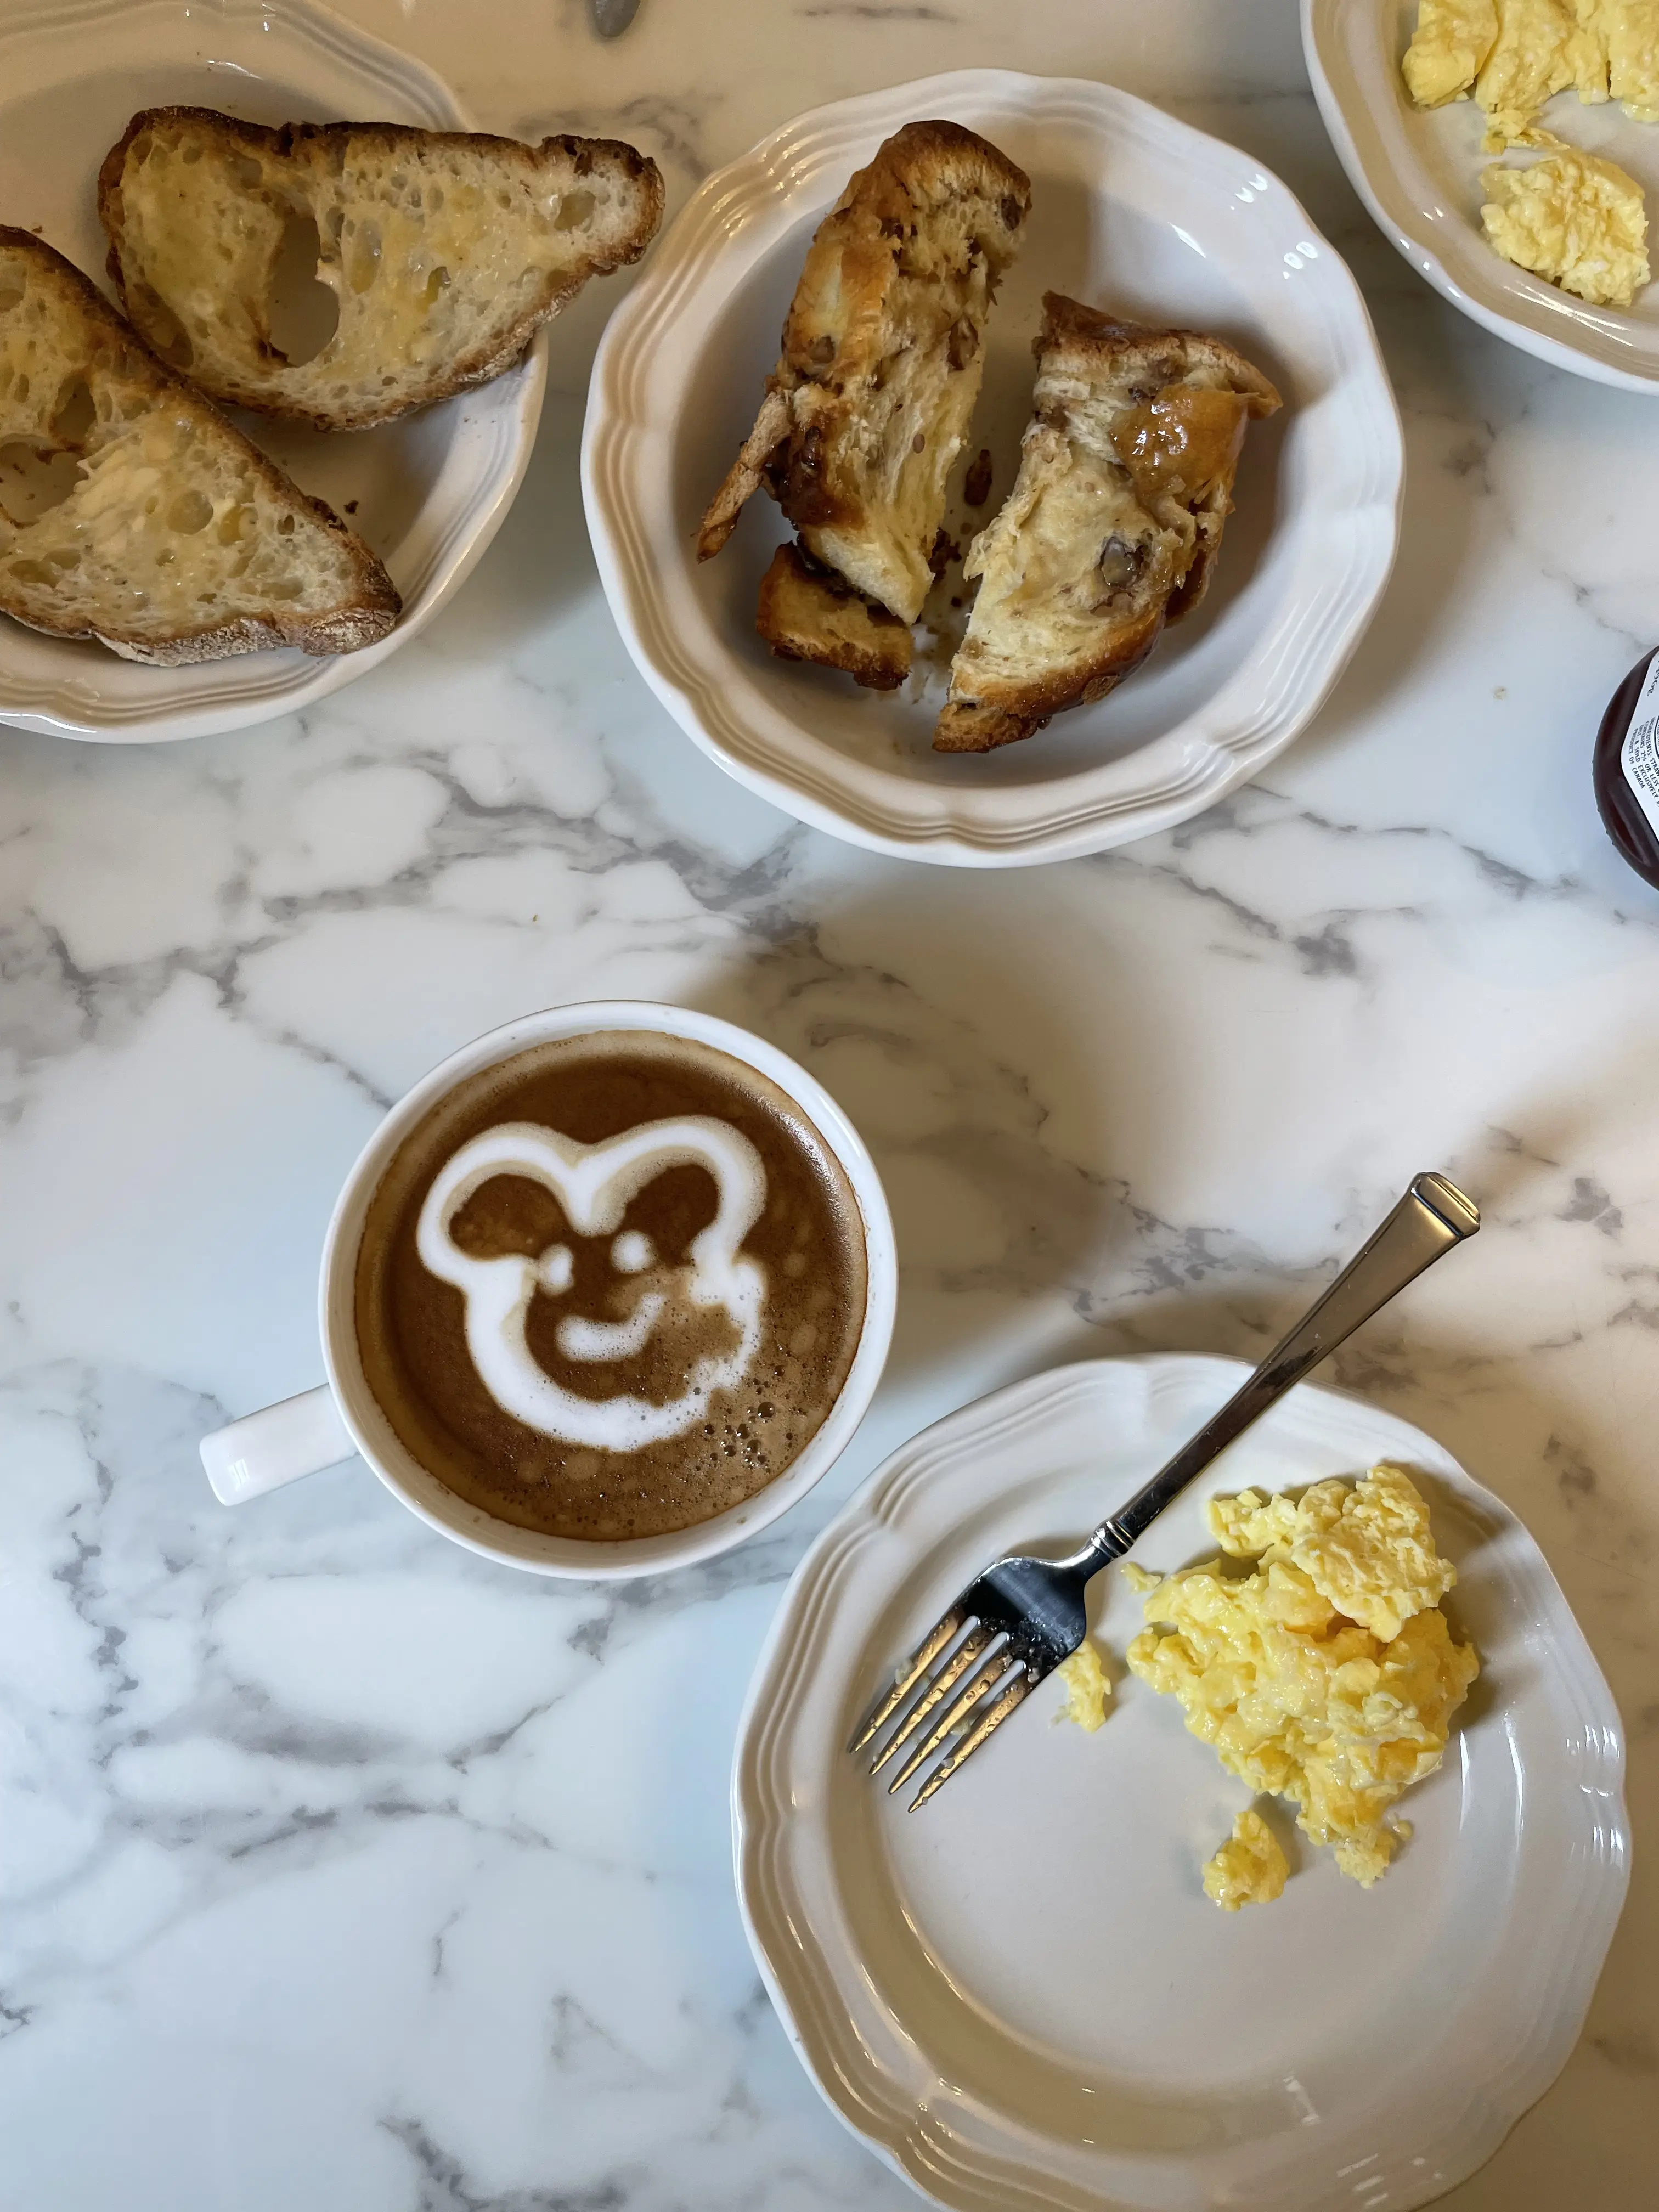 Eggs, Orwasher&rsquo;s toast &amp; babka, and a likeness of myself in the latté art